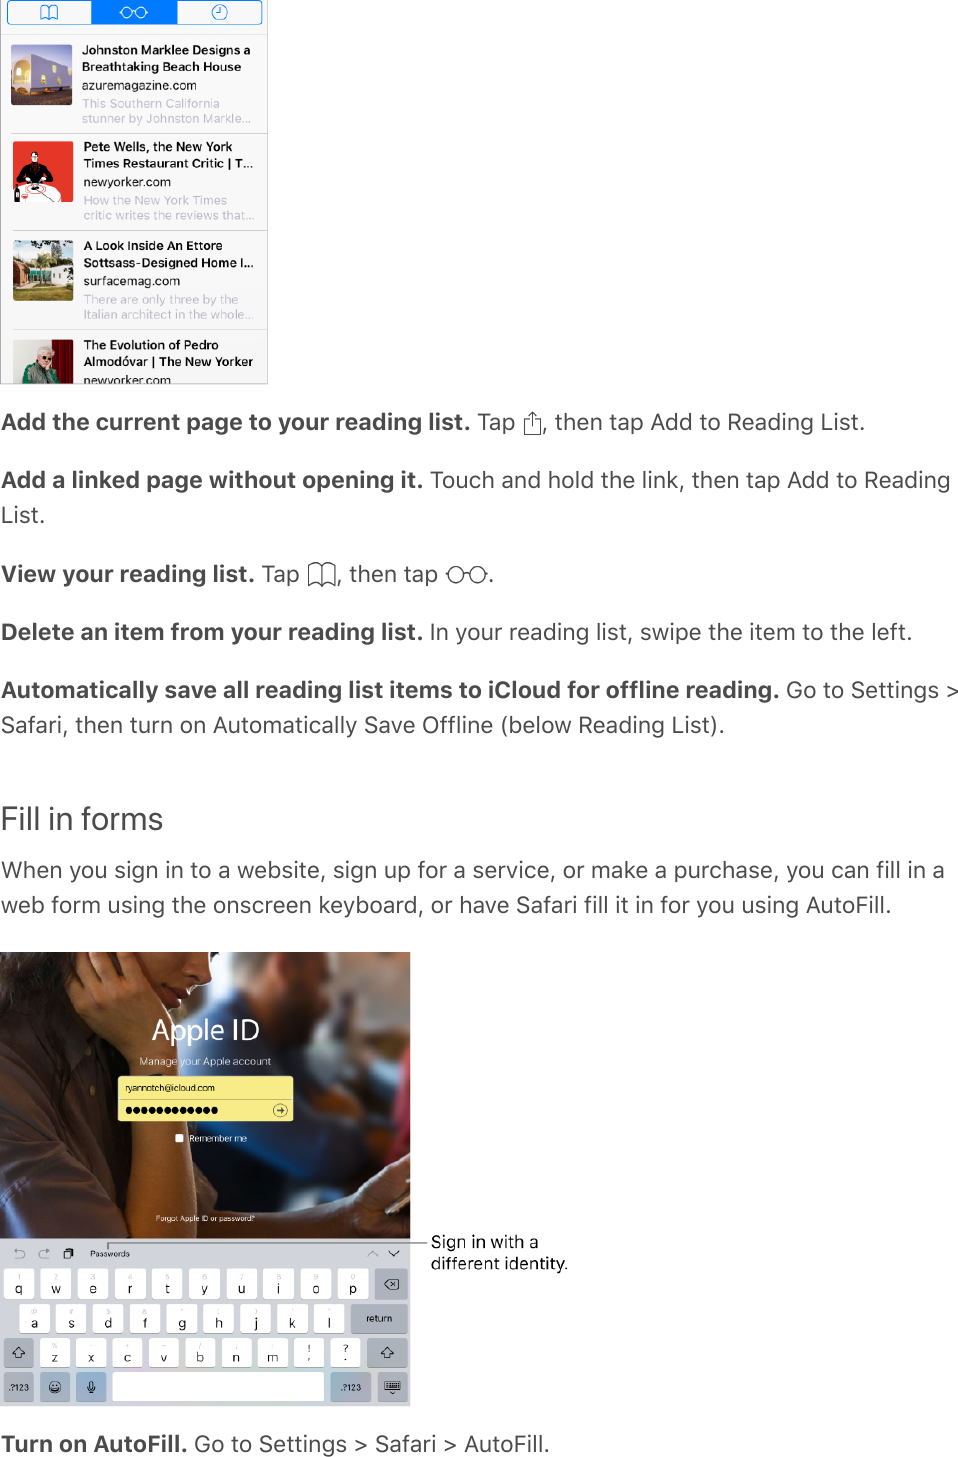 Add the current page to your reading list. Tap  , then tap Add to Reading List.Add a linked page without opening it. Touch and hold the link, then tap Add to ReadingList.View your reading list. Tap  , then tap  .Delete an item from your reading list. In your reading list, swipe the item to the left.Automatically save all reading list items to iCloud for offline reading. Go to Settings &gt;Safari, then turn on Automatically Save Offline (below Reading List).Fill in formsWhen you sign in to a website, sign up for a service, or make a purchase, you can fill in aweb form using the onscreen keyboard, or have Safari fill it in for you using AutoFill.Turn on AutoFill. Go to Settings &gt; Safari &gt; AutoFill.